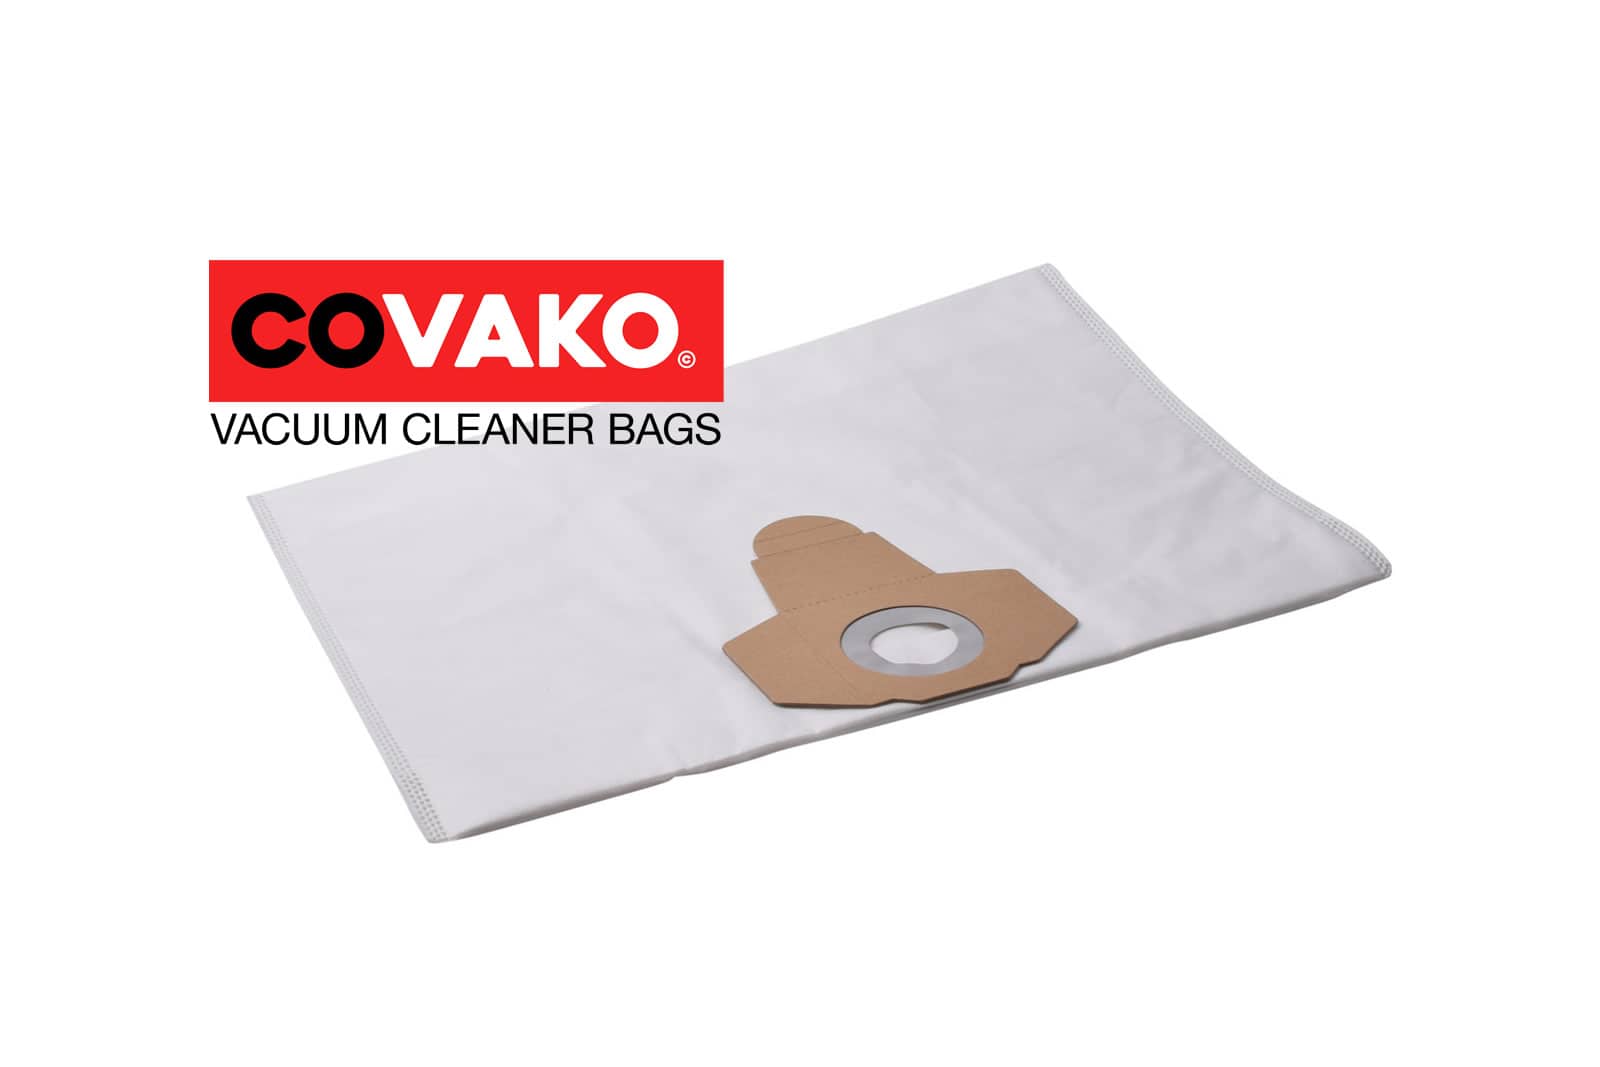 ewt NTS 20 / Synthesis - ewt vacuum cleaner bags